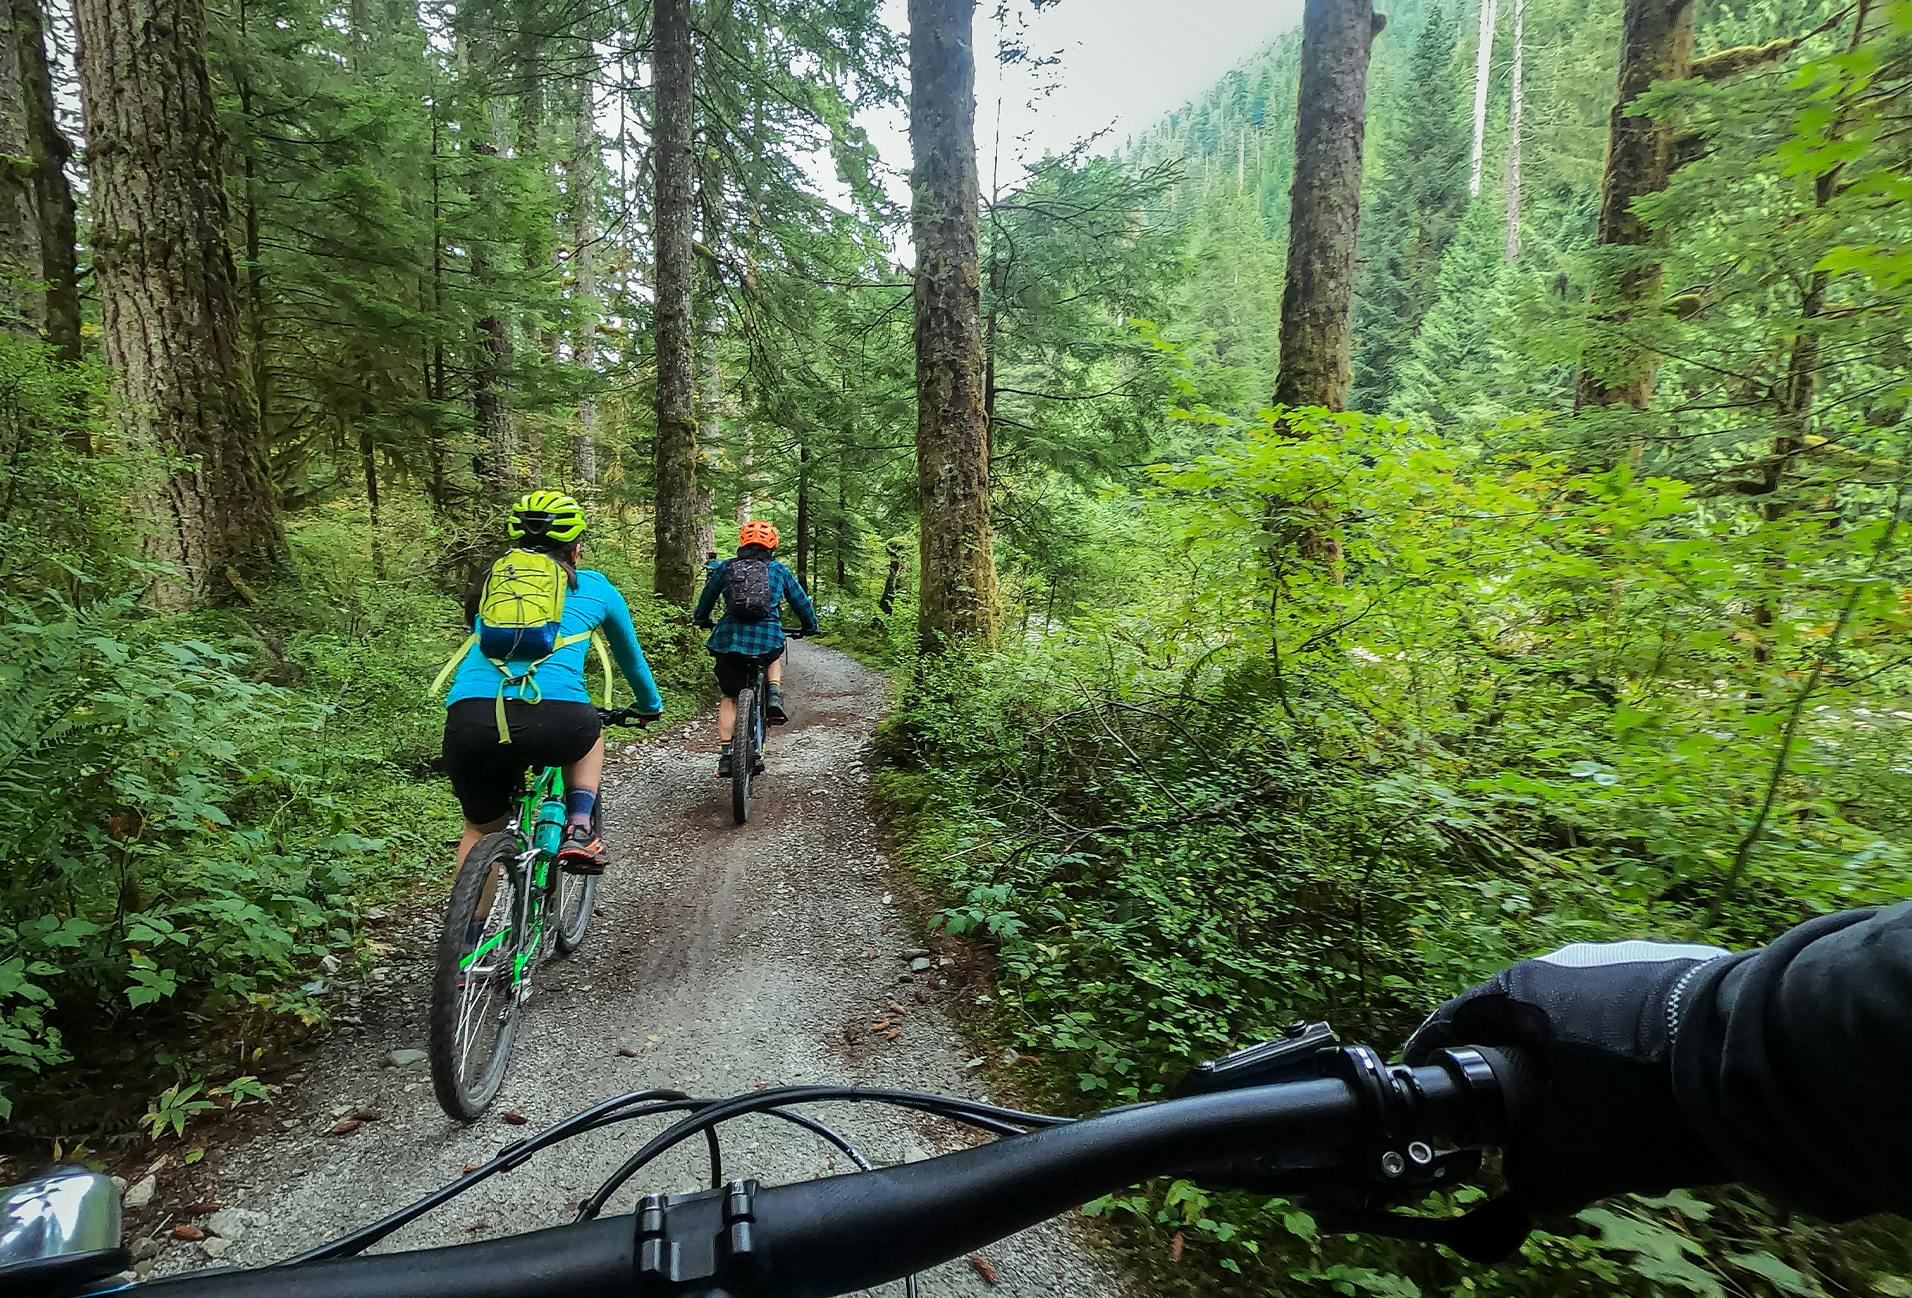 there are two people riding bikes on a trail in the woods